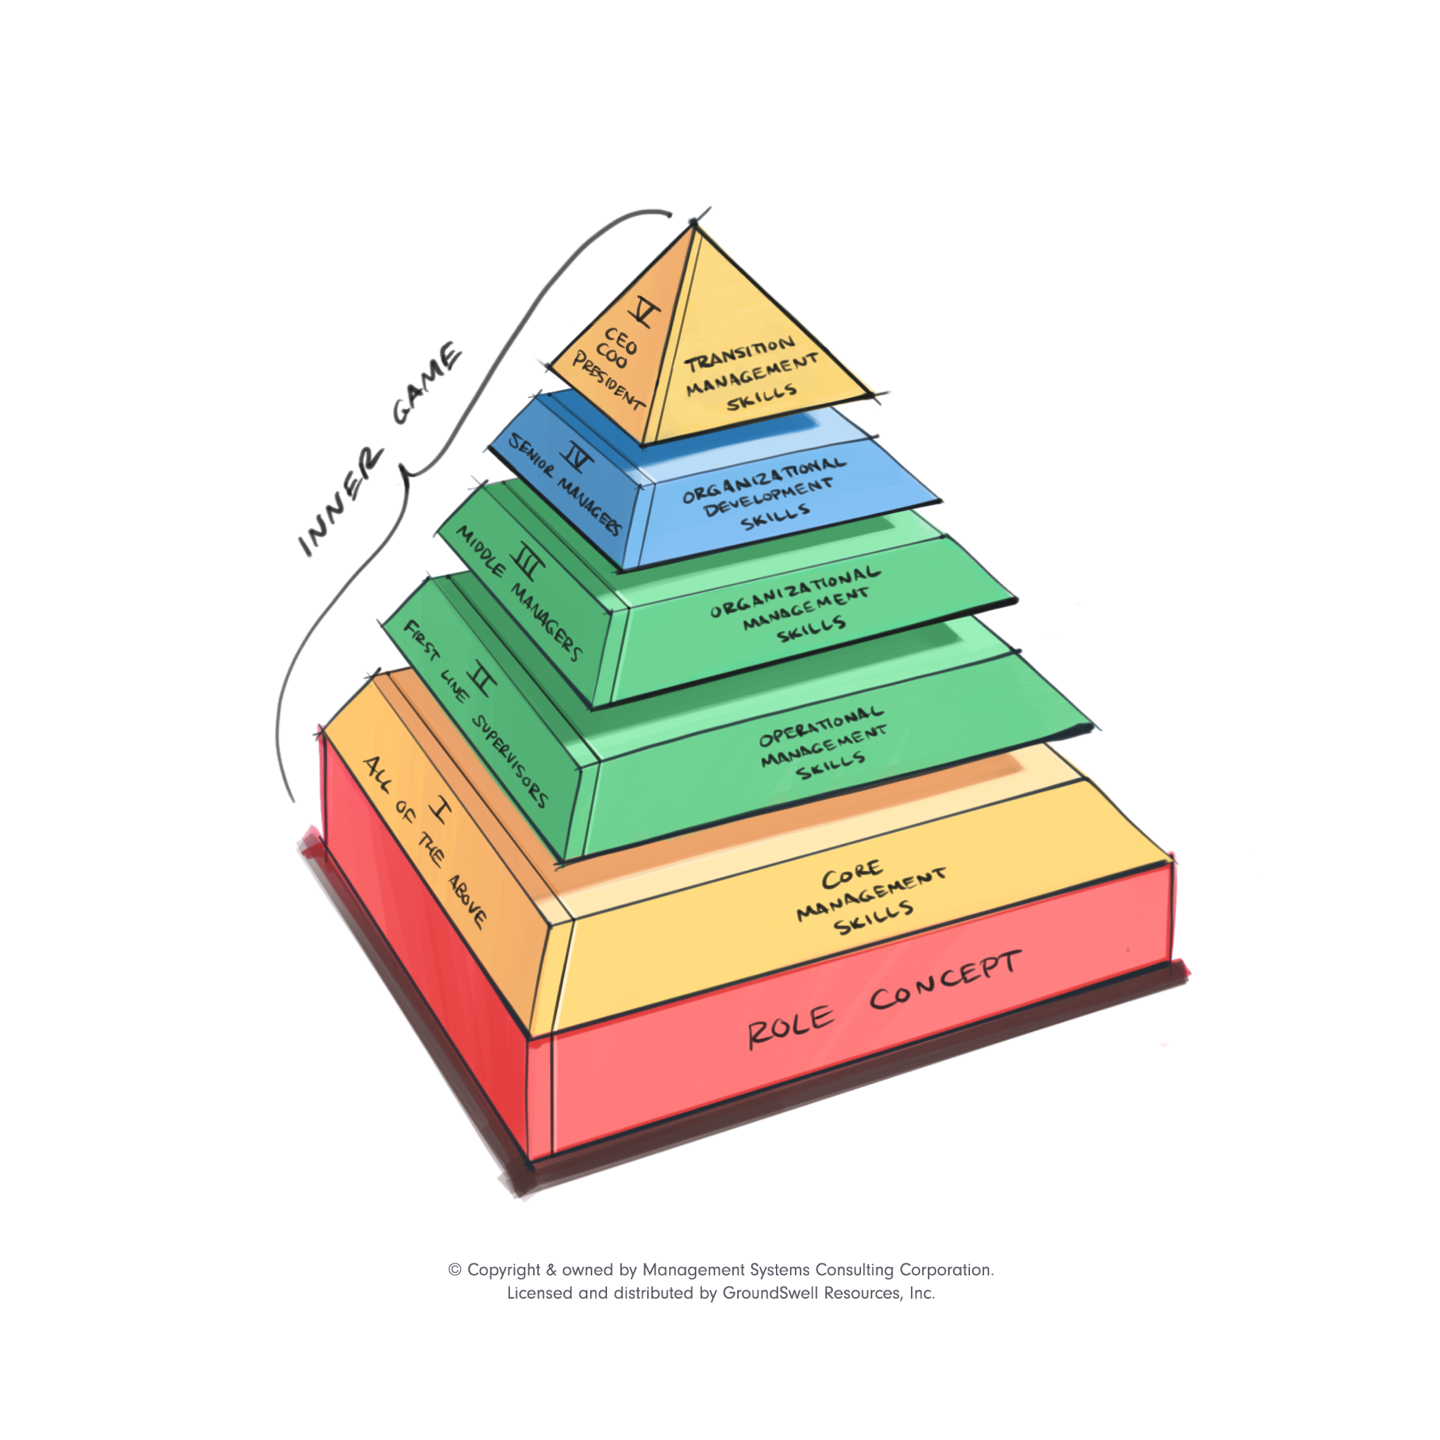 A pyramid depicting the key components to management and leadership